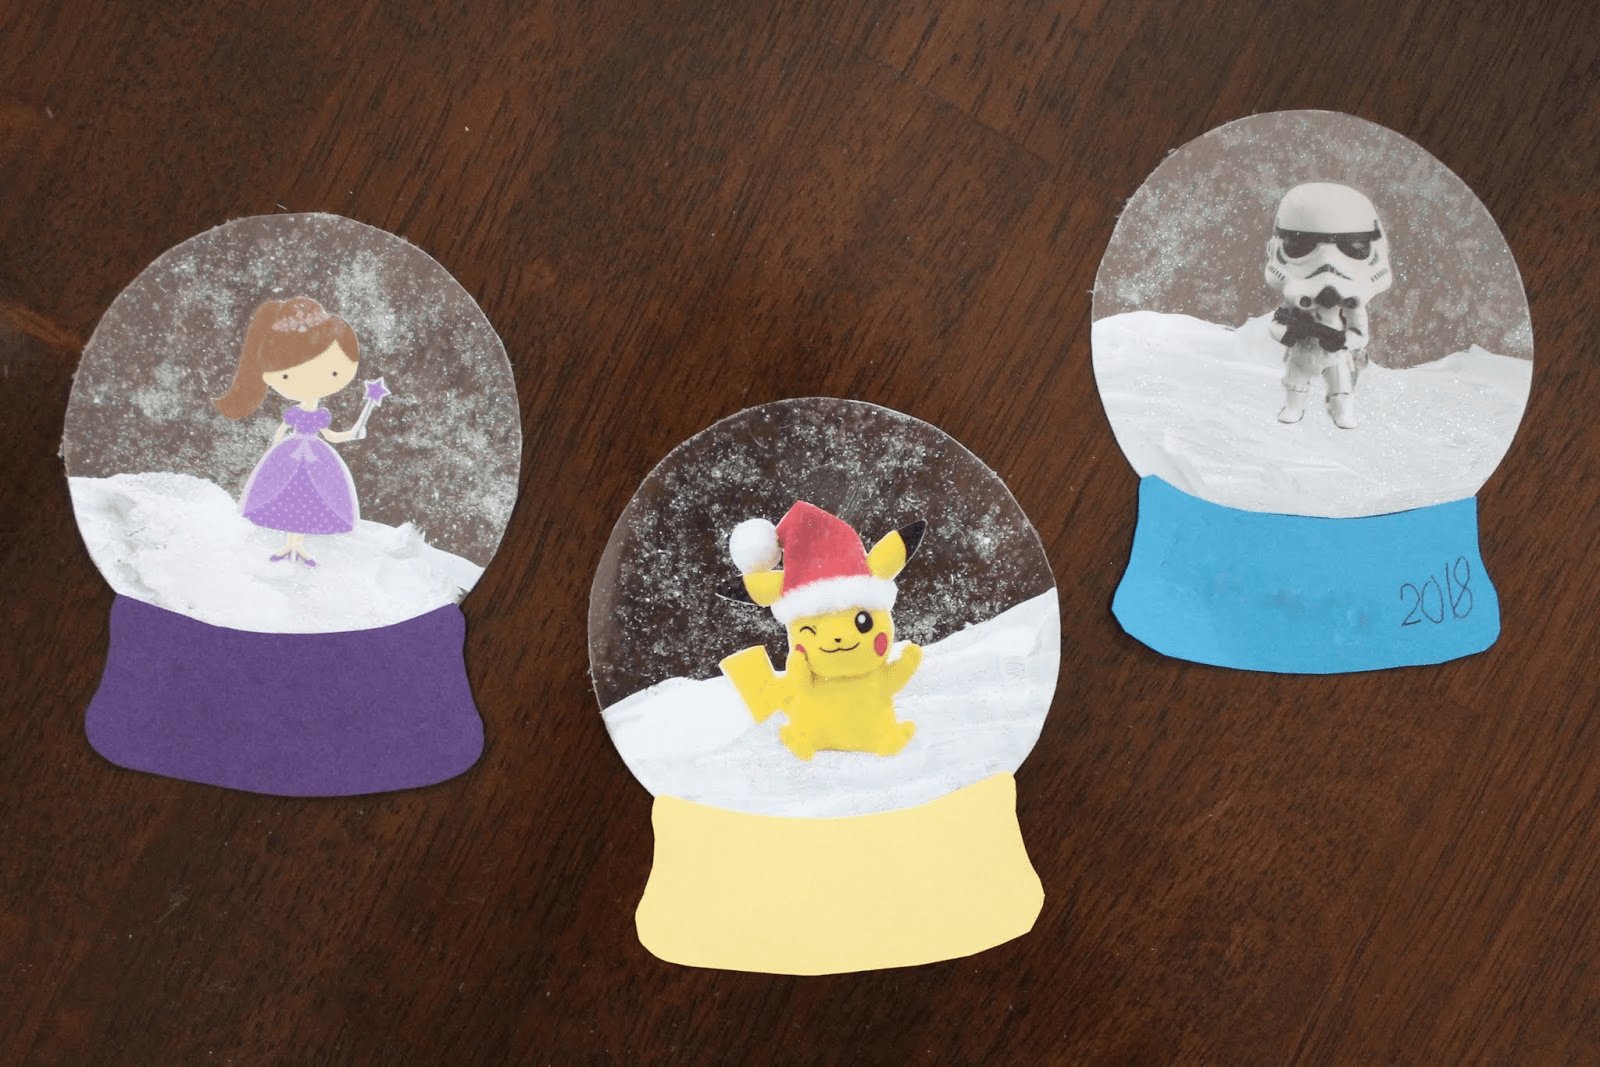 How To Make A Snow Globe Ornament With Paper